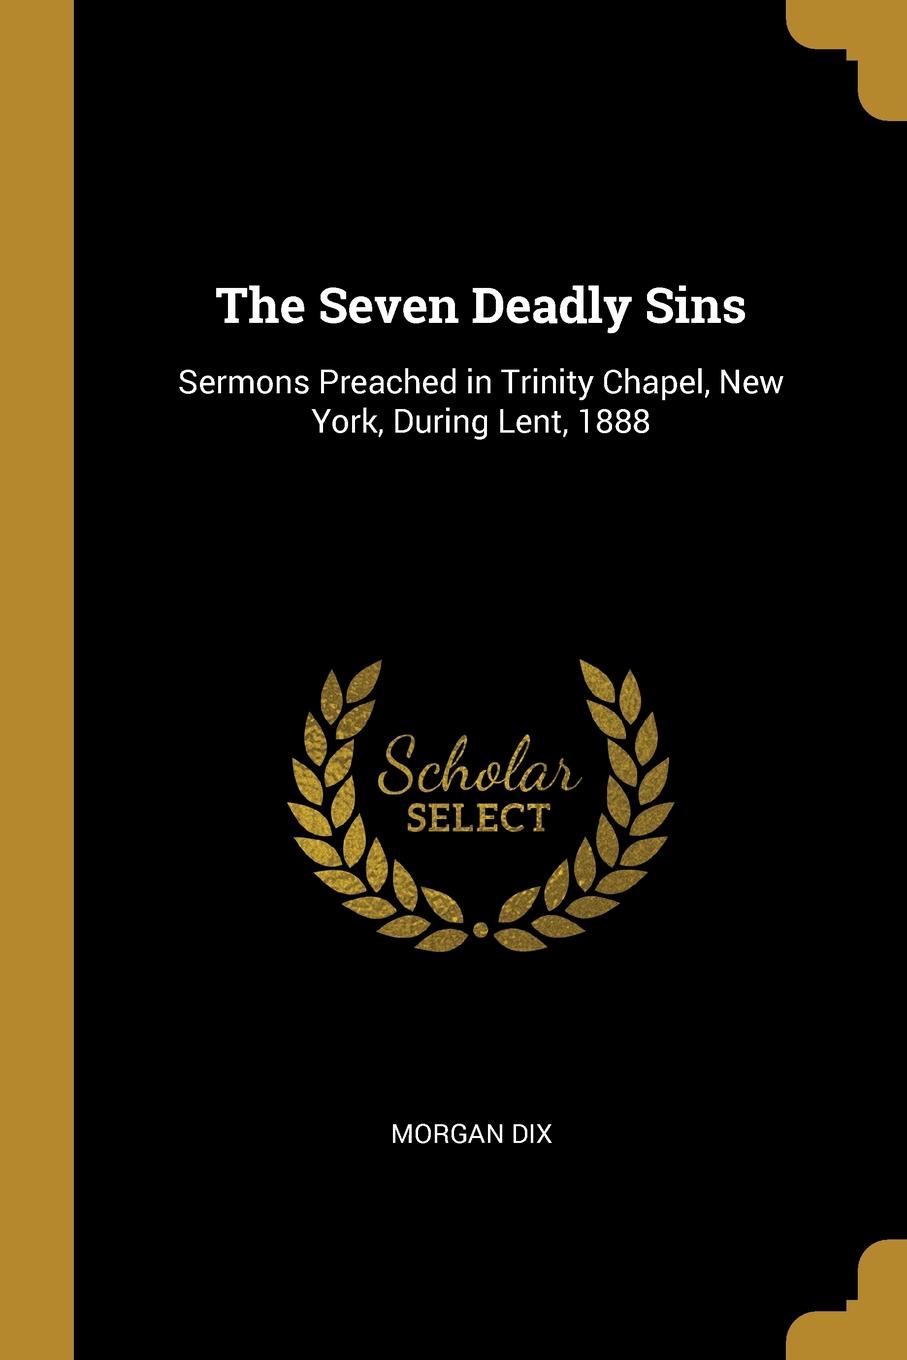 The Seven Deadly Sins. Sermons Preached in Trinity Chapel, New York, During Lent, 1888